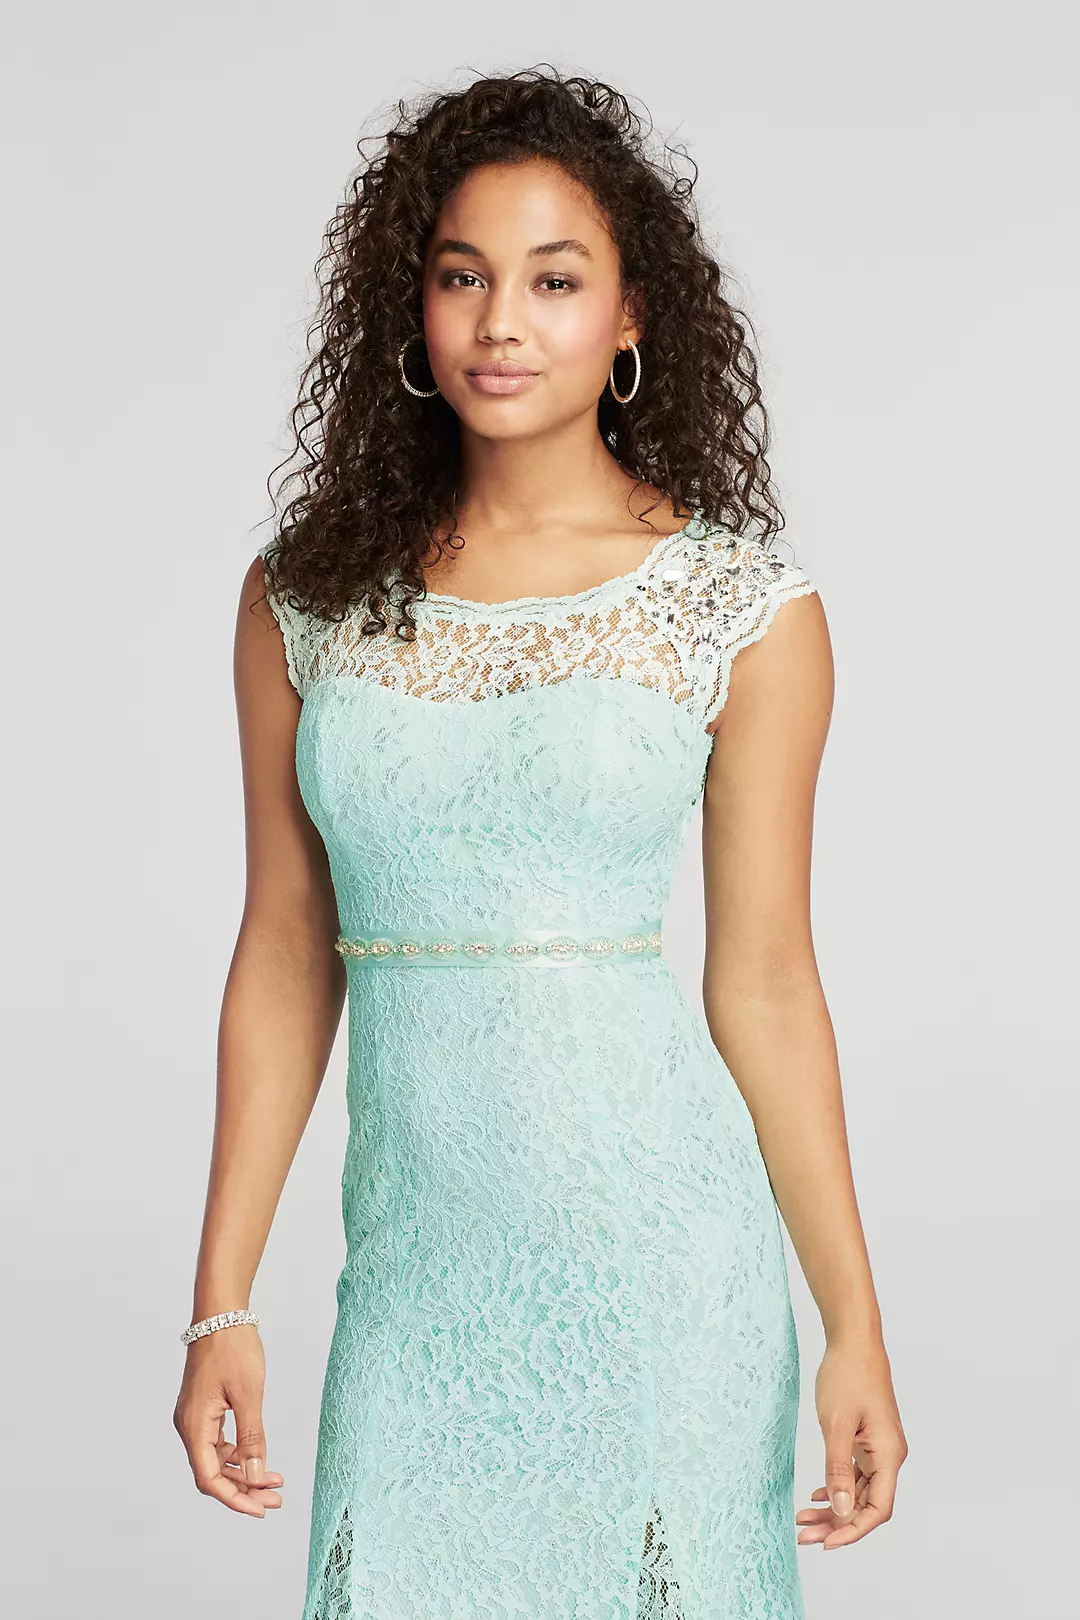 Lace Cap Sleeve Prom Dress with Beaded Waist Image 3